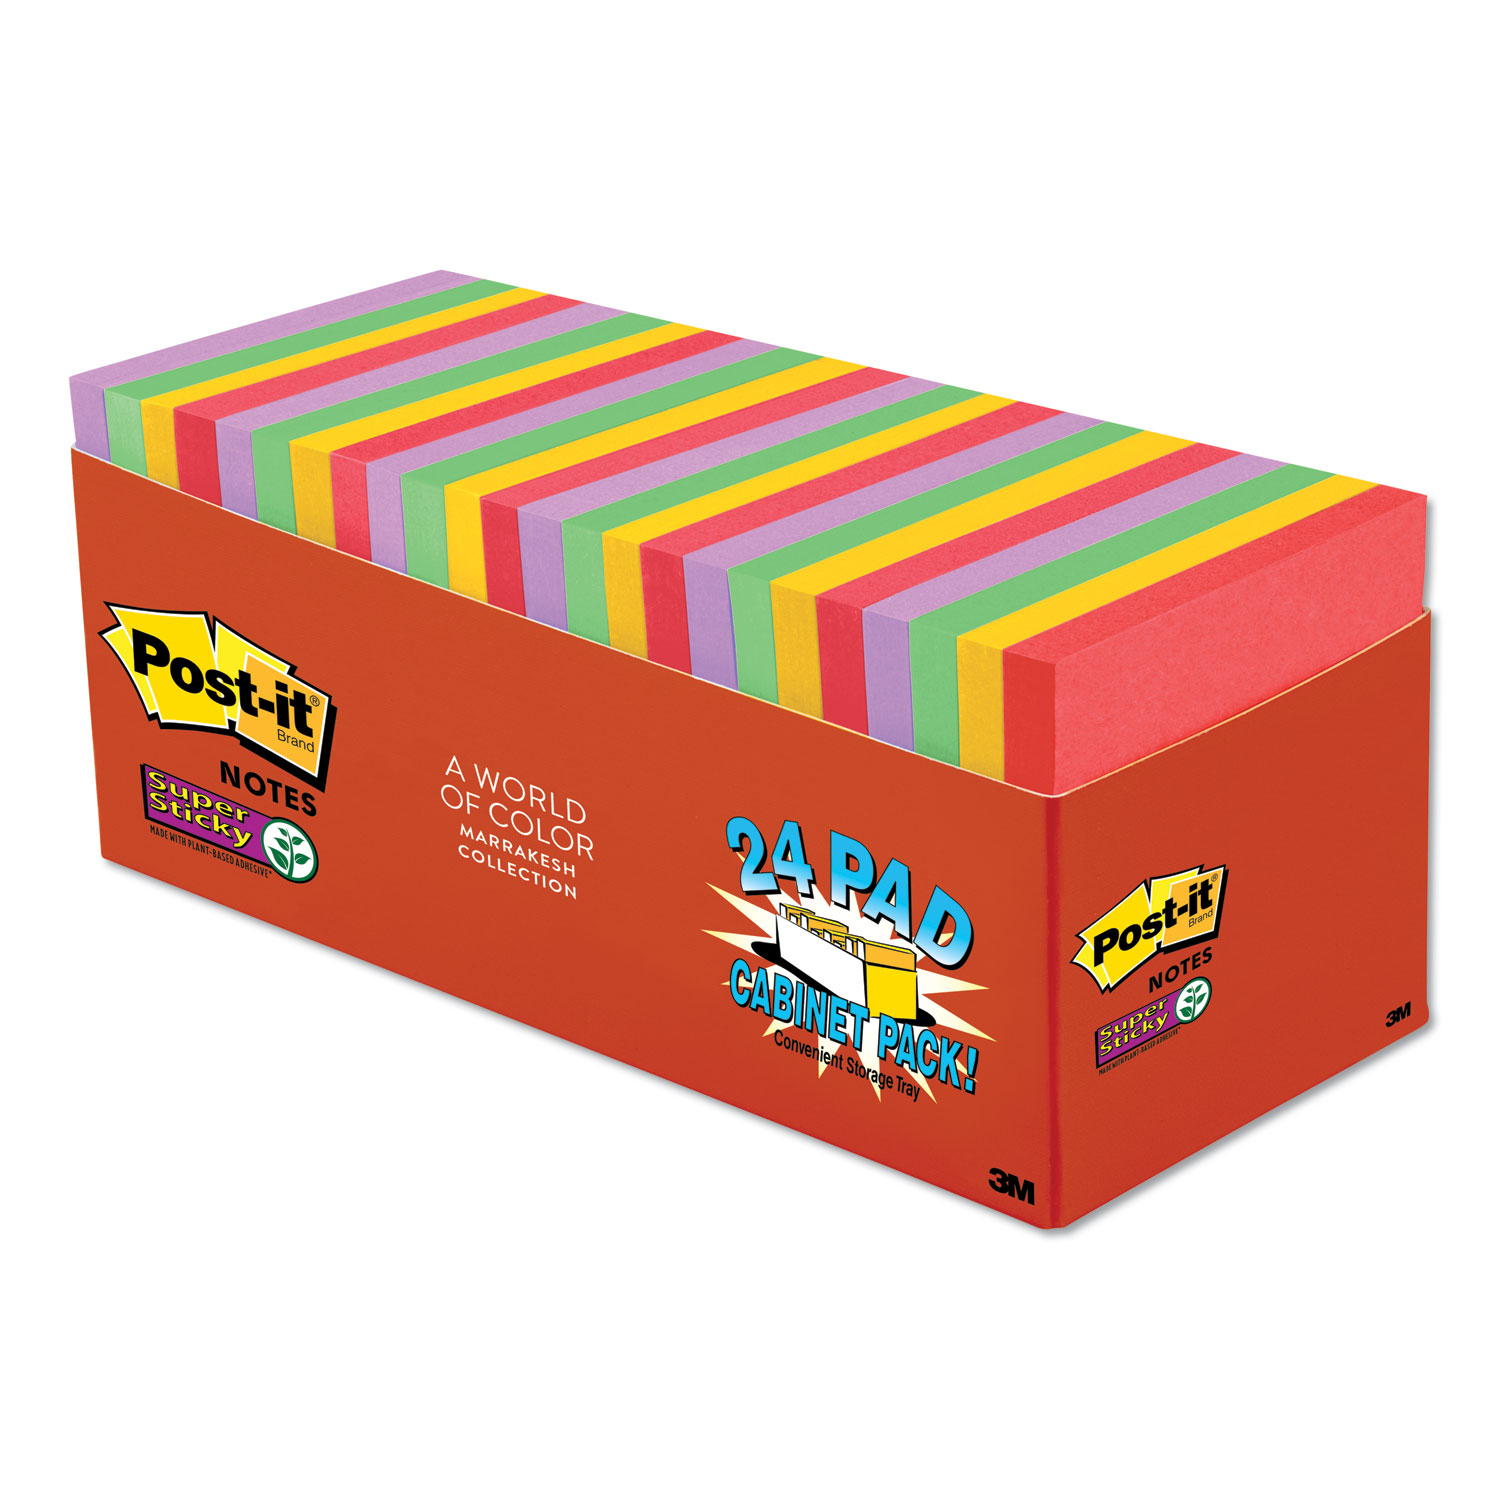  Post-it Notes Super Sticky 654-24SSAN-CP Pads in Marrakesh Colors, 3 x 3, 70-Sheet, 24/Pack (MMM65424SSANCP) 